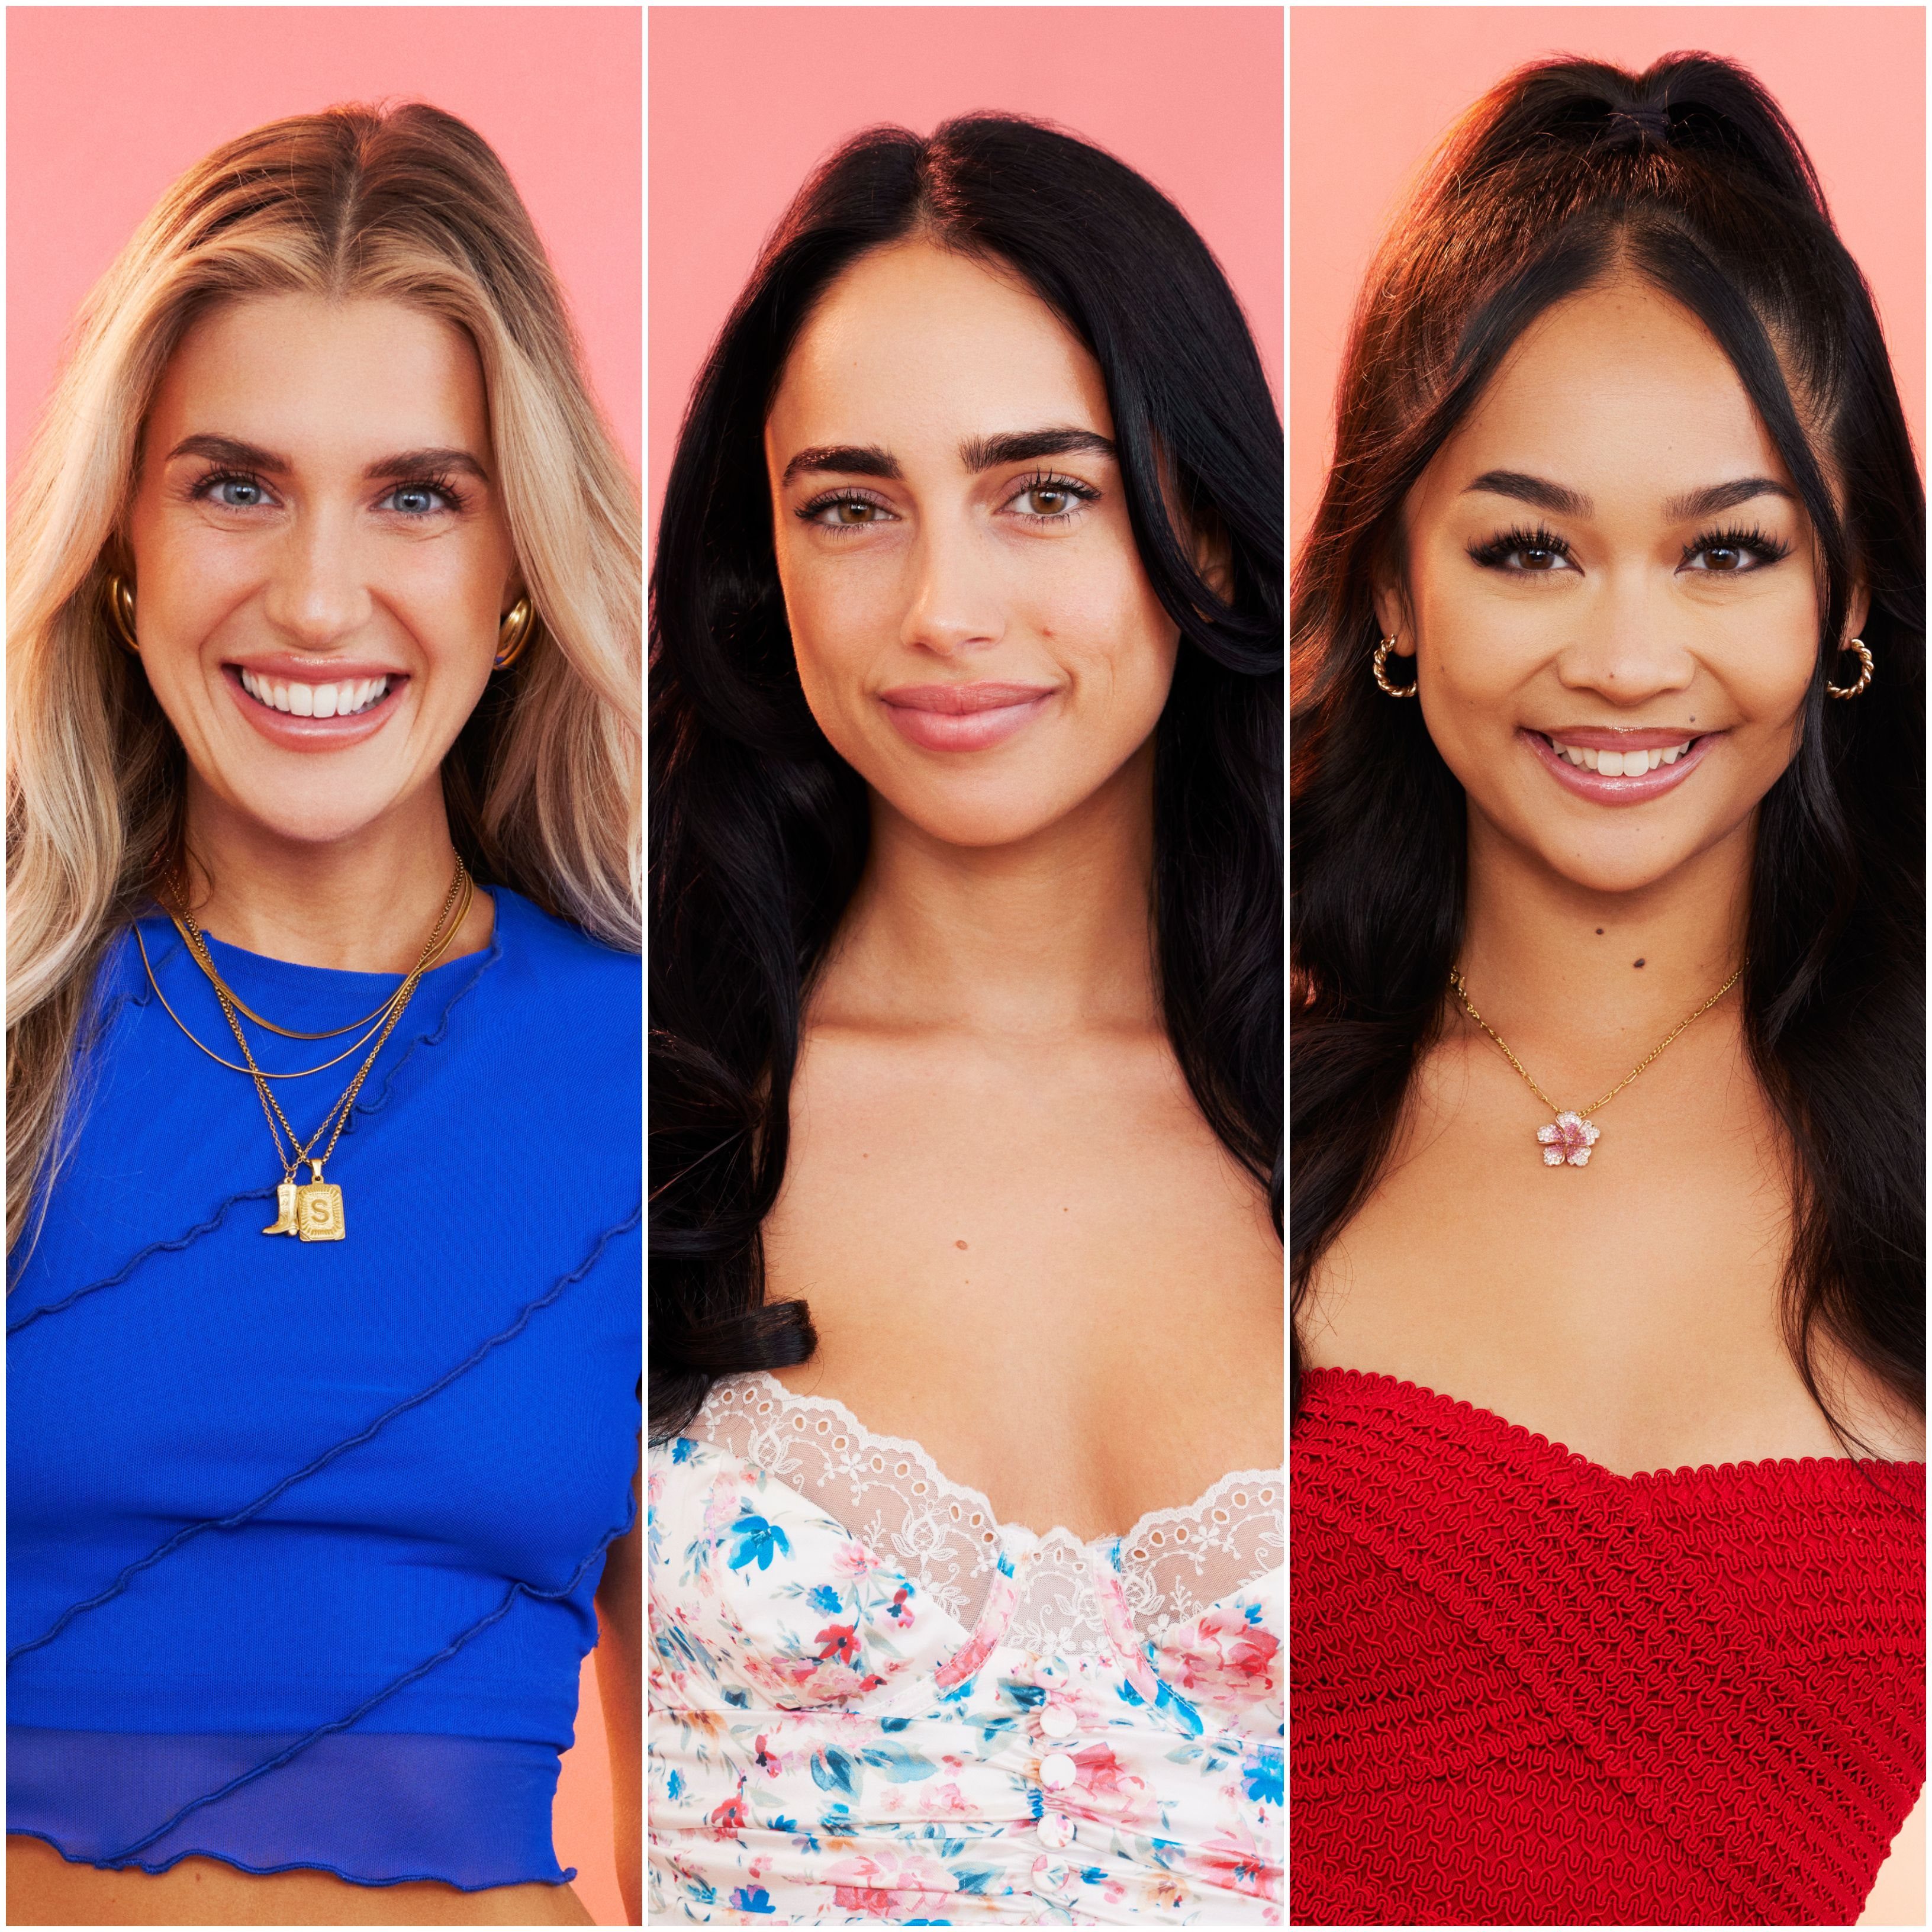 The Bachelor Drama Between Maria, Sydney, and Lea: Everything You Need to Know